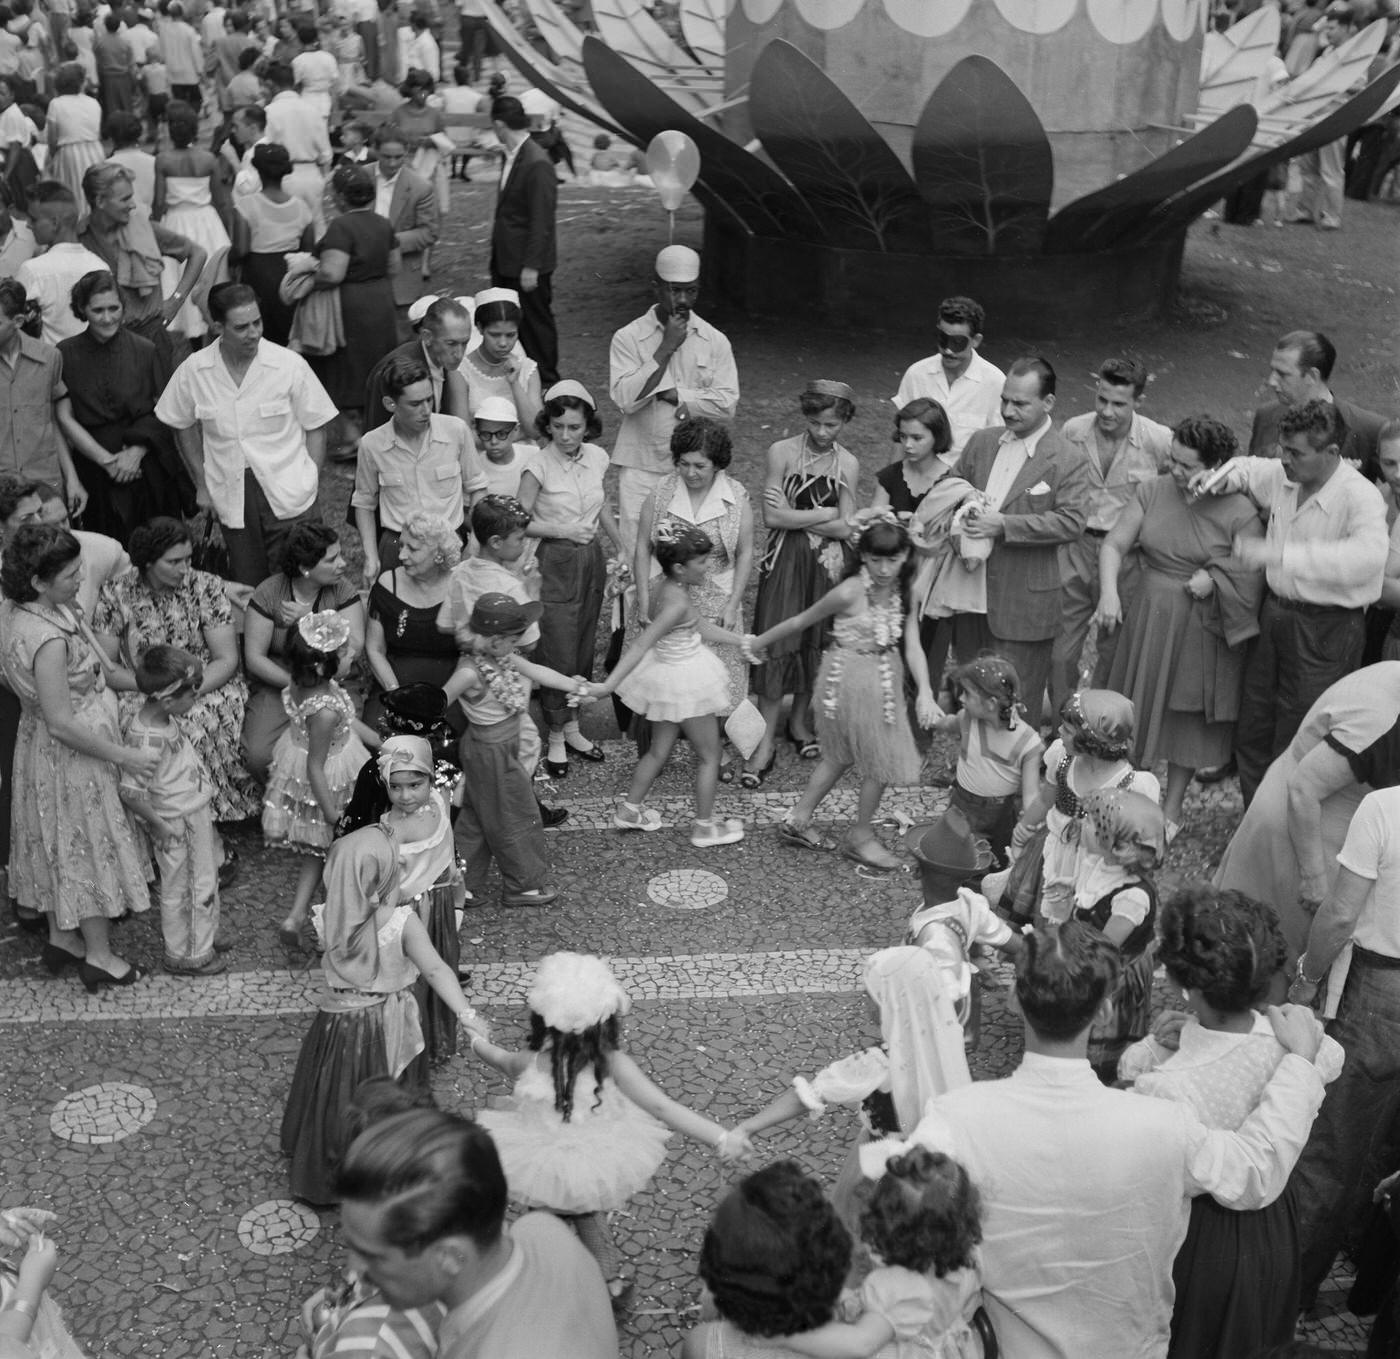 Dancing and Partying on the Street, Rio Carnival 1953